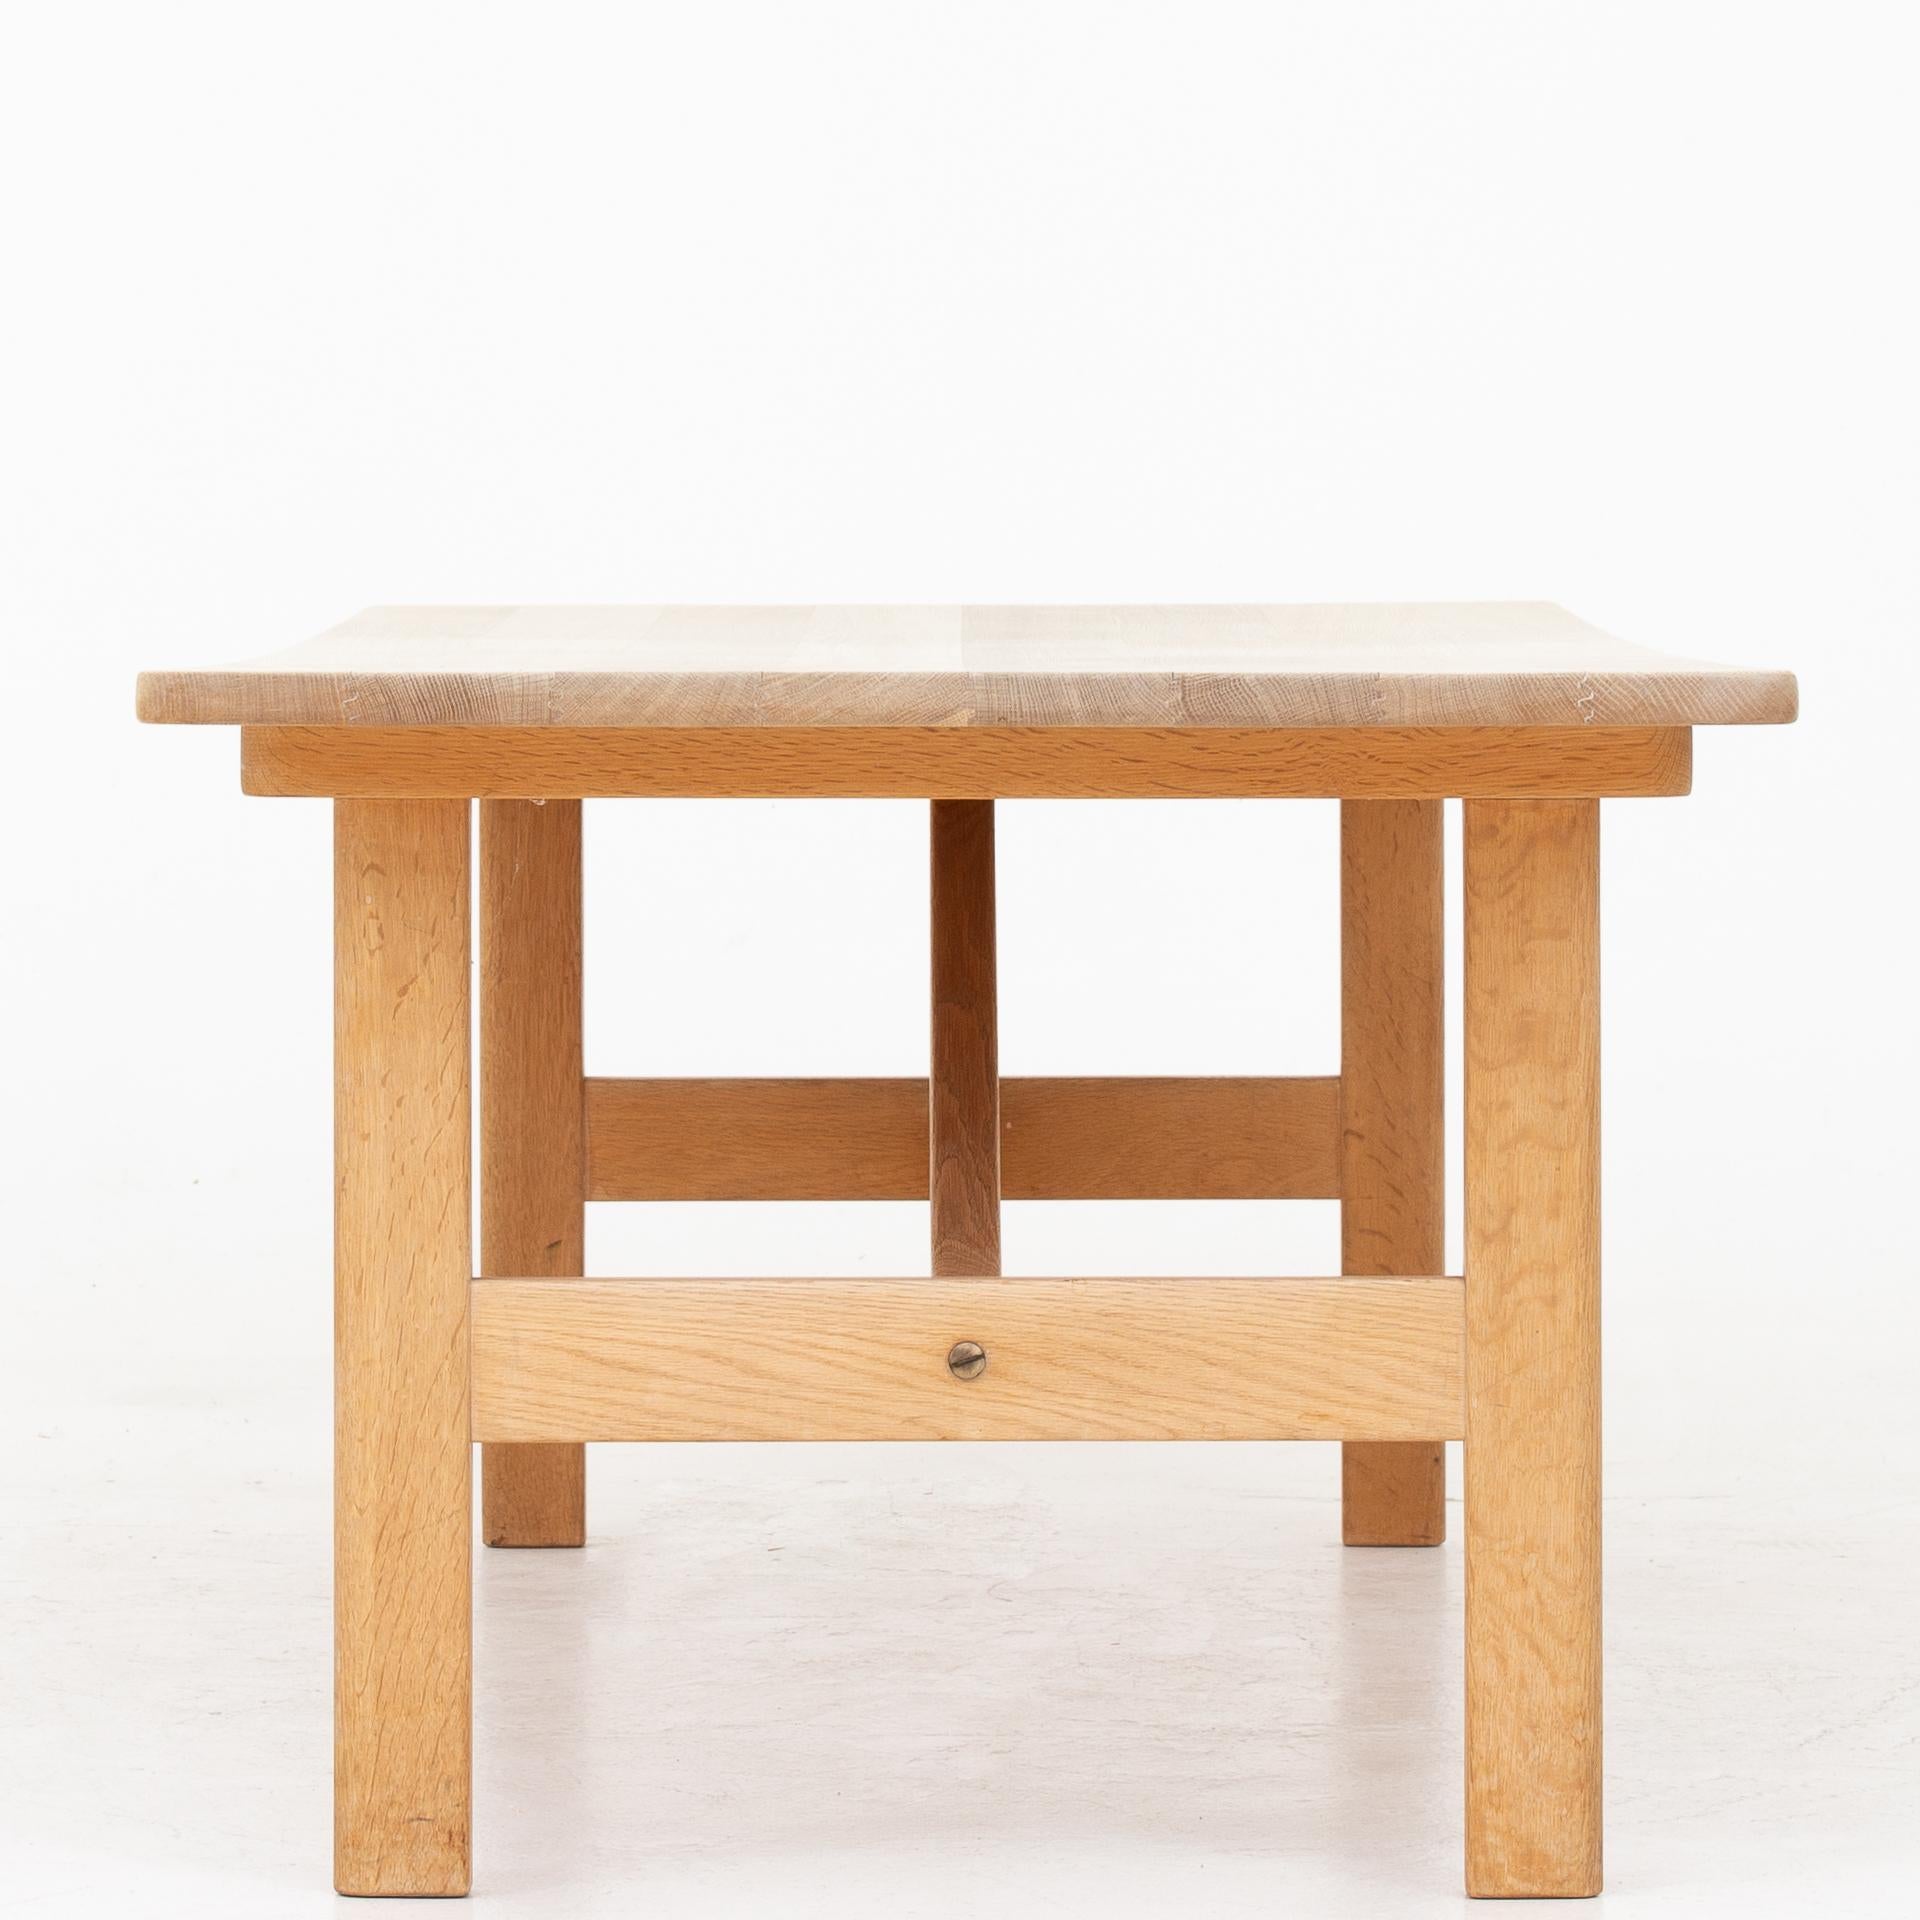 Model 286 - Coffee table in solid, soaped oak. Maker Fredericia Furniture.